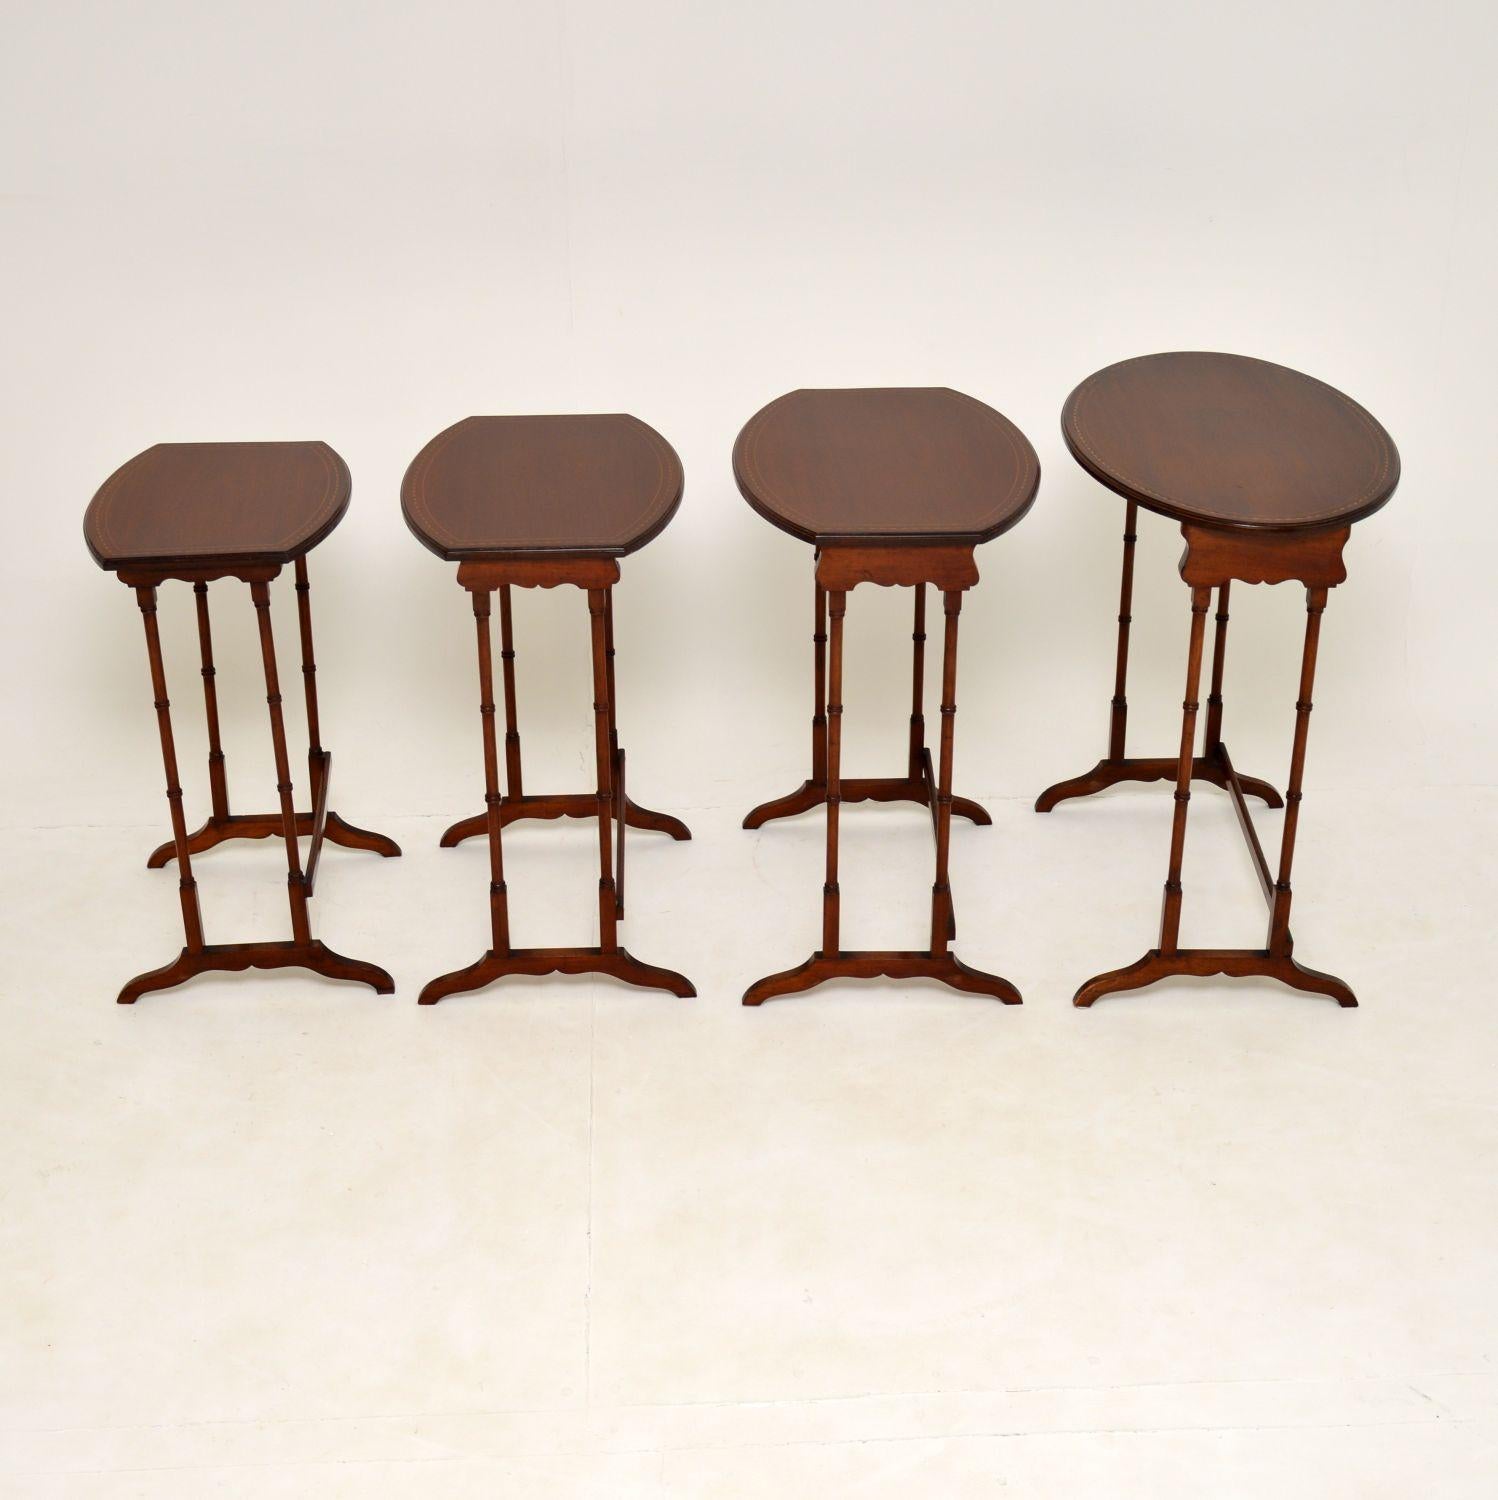 Early 20th Century Antique Edwardian Inlaid Mahogany Nest of 4 Tables